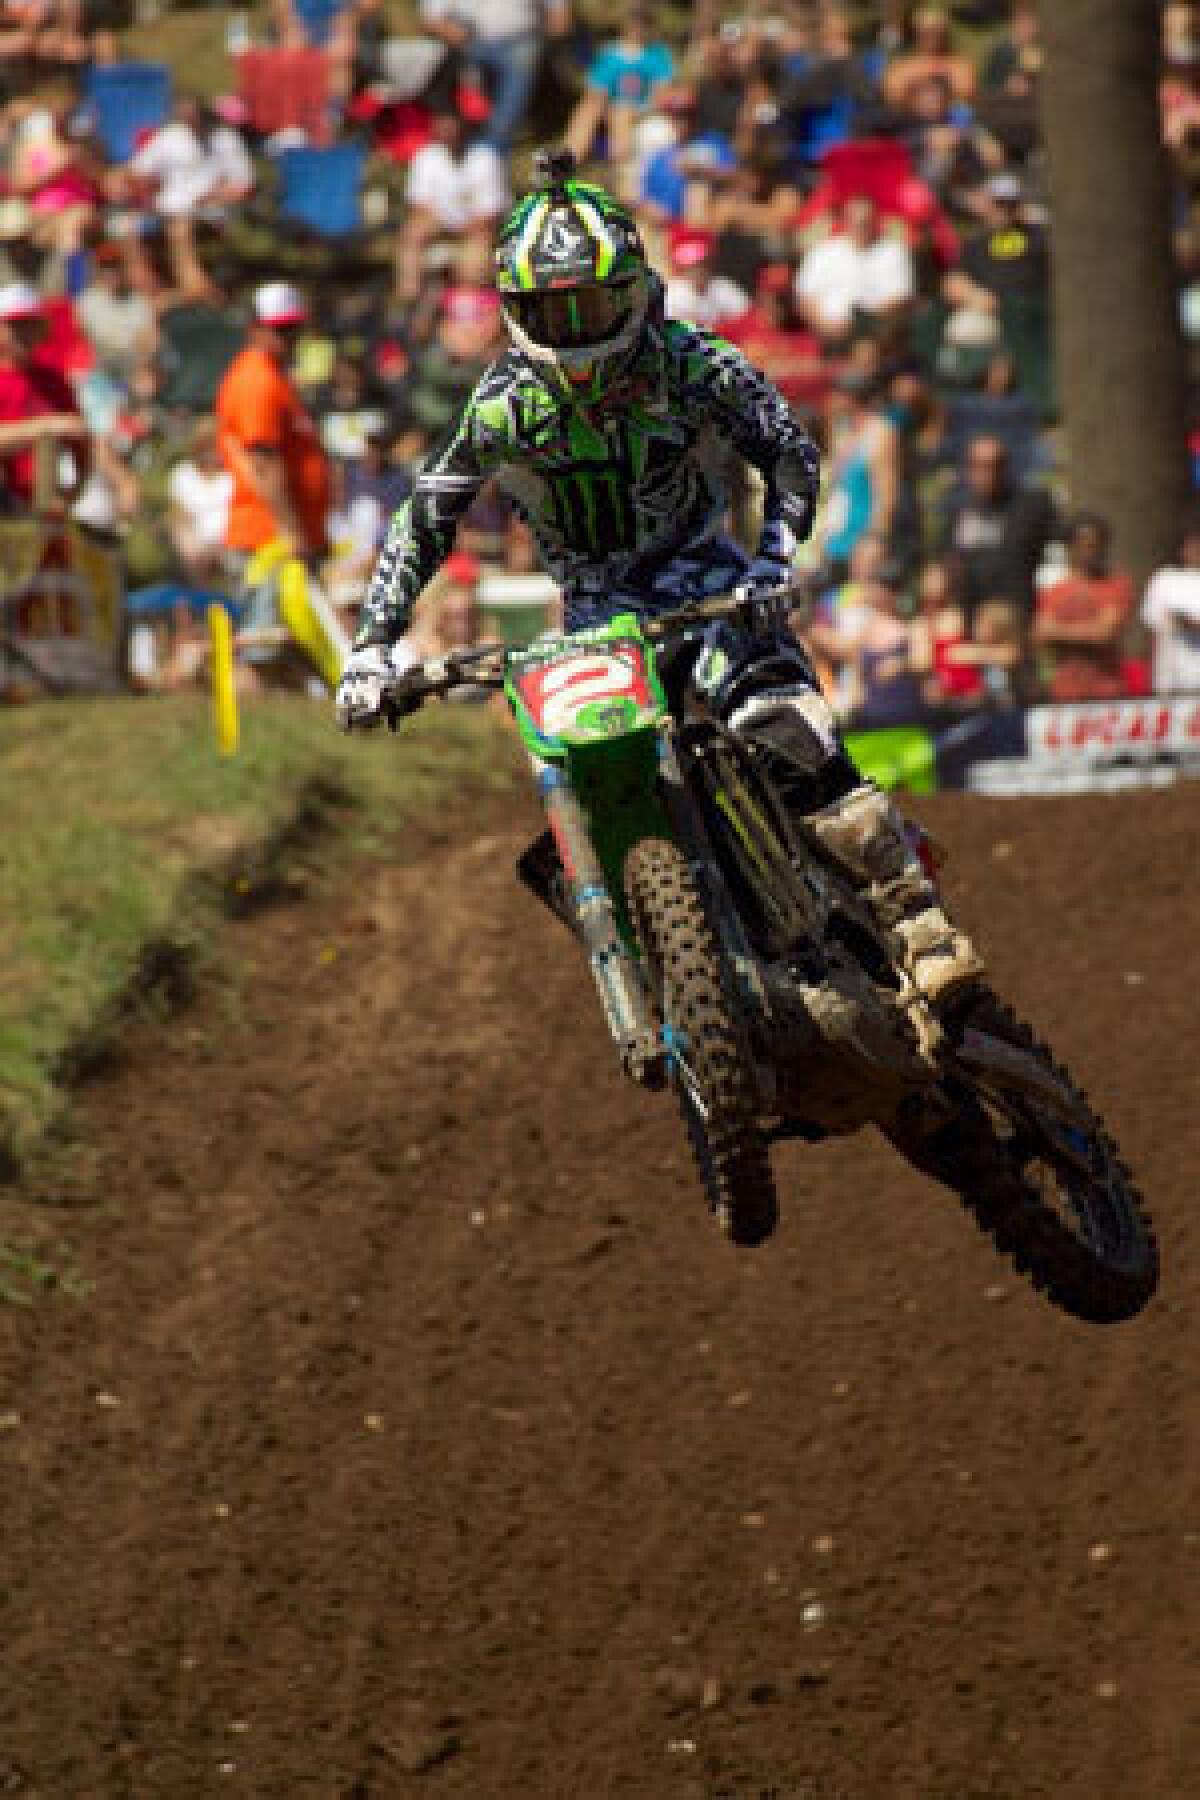 Ryan Villopoto has clinched the title in the premier 450 class of the Lucas Oil Pro Motocross Championship.